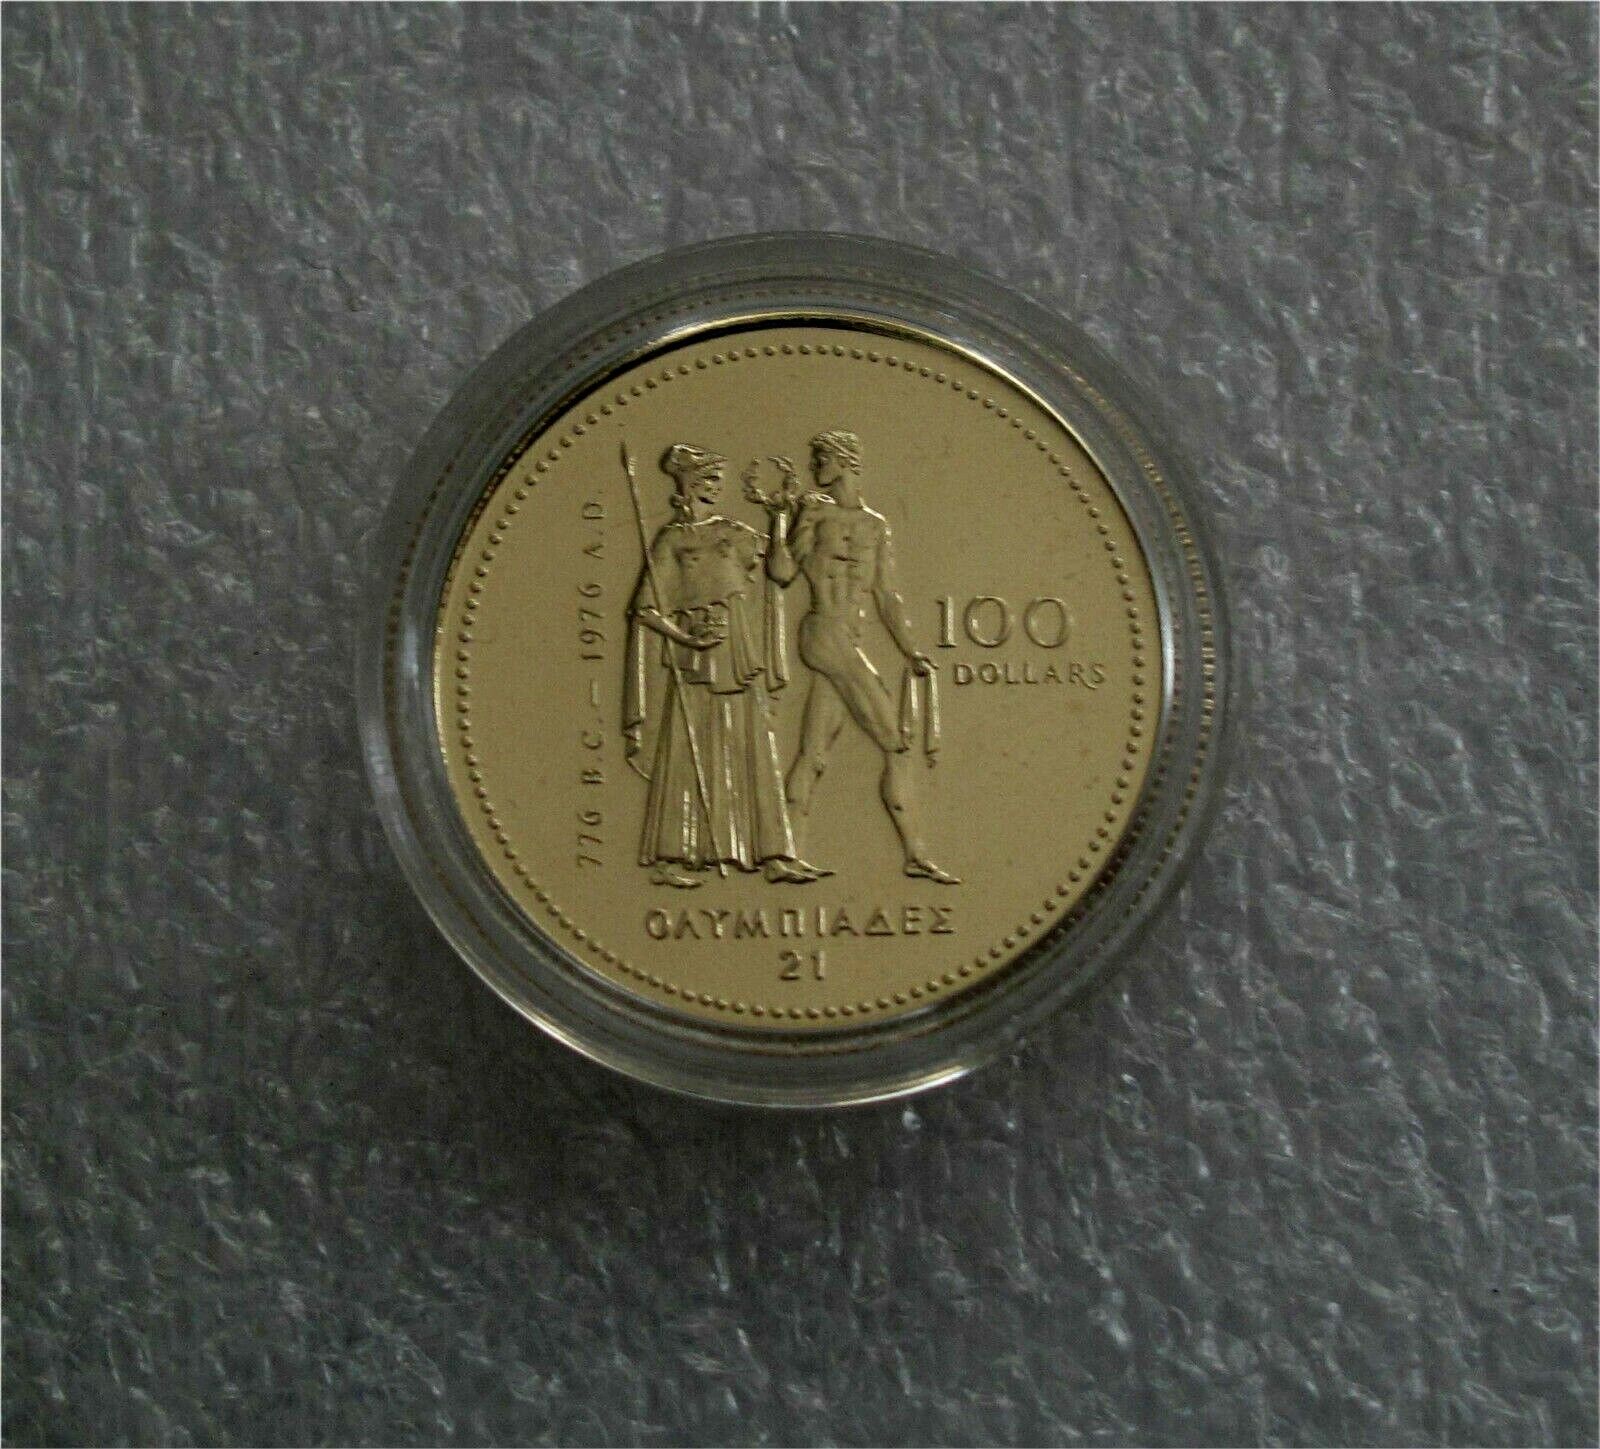 CANADA $100 DOLLARS GOLD COIN, MONTREAL OLYMPICS 1976